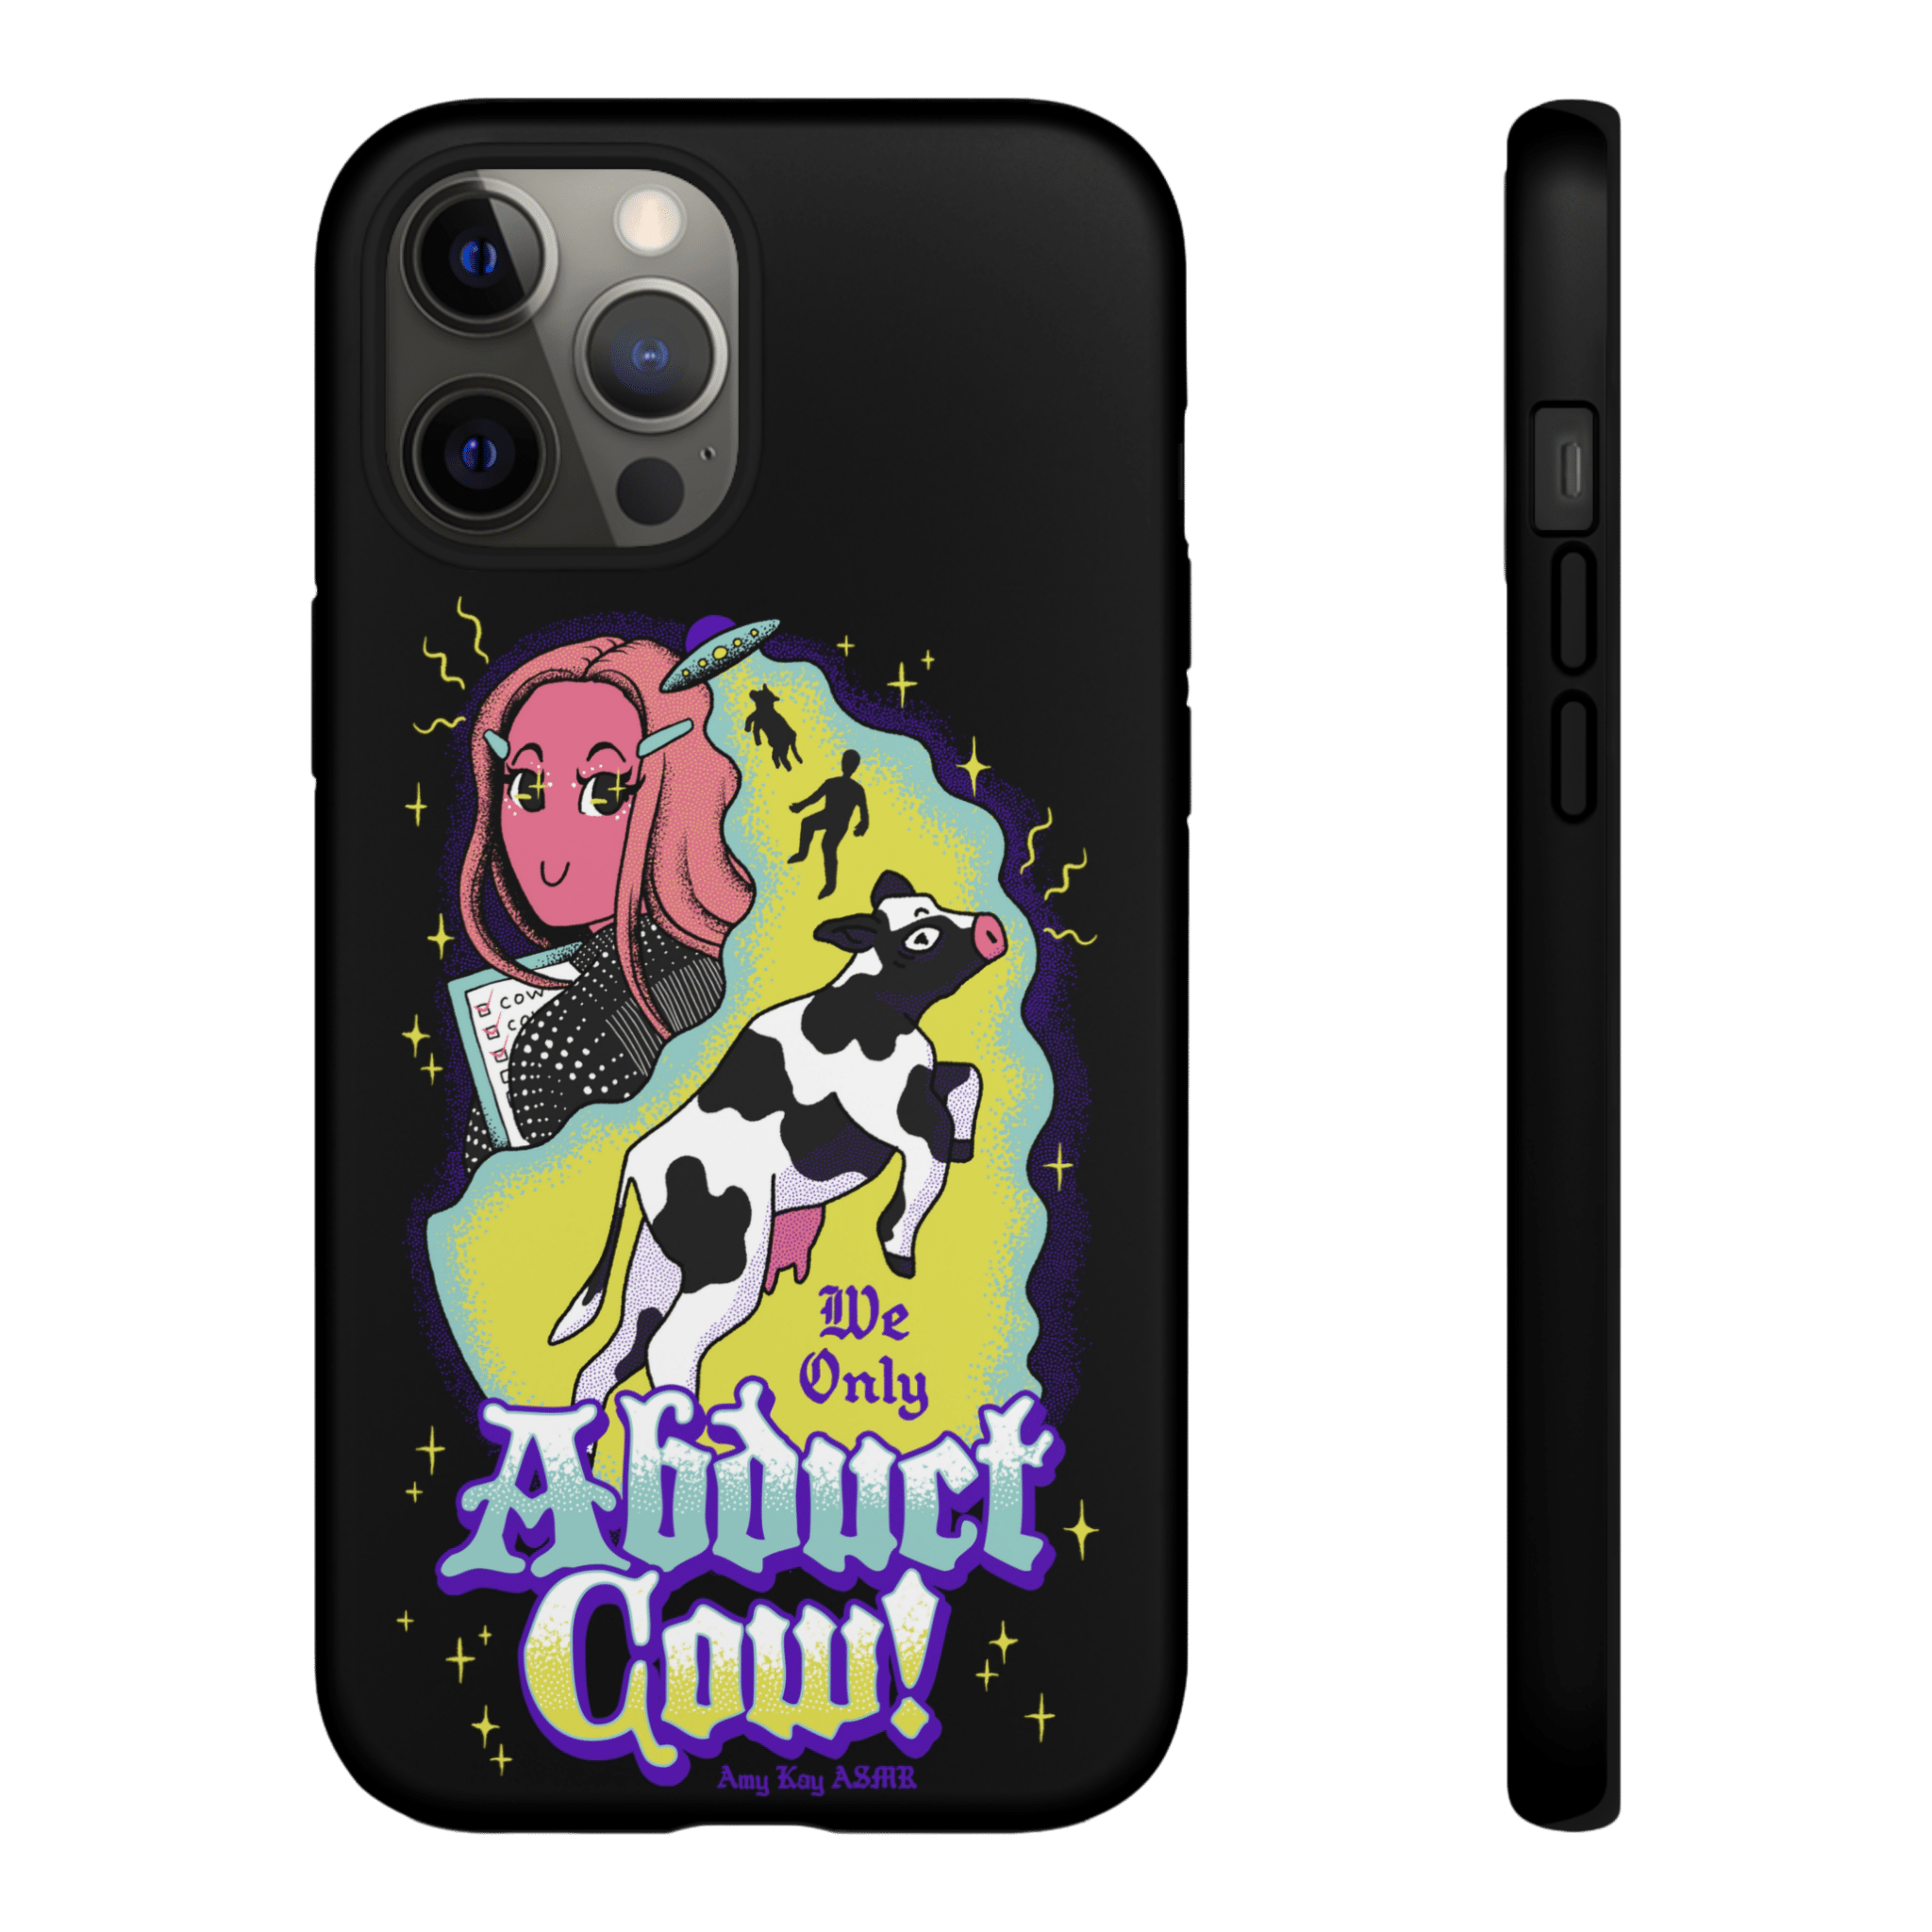 We Only Abduct Cow Phone Case